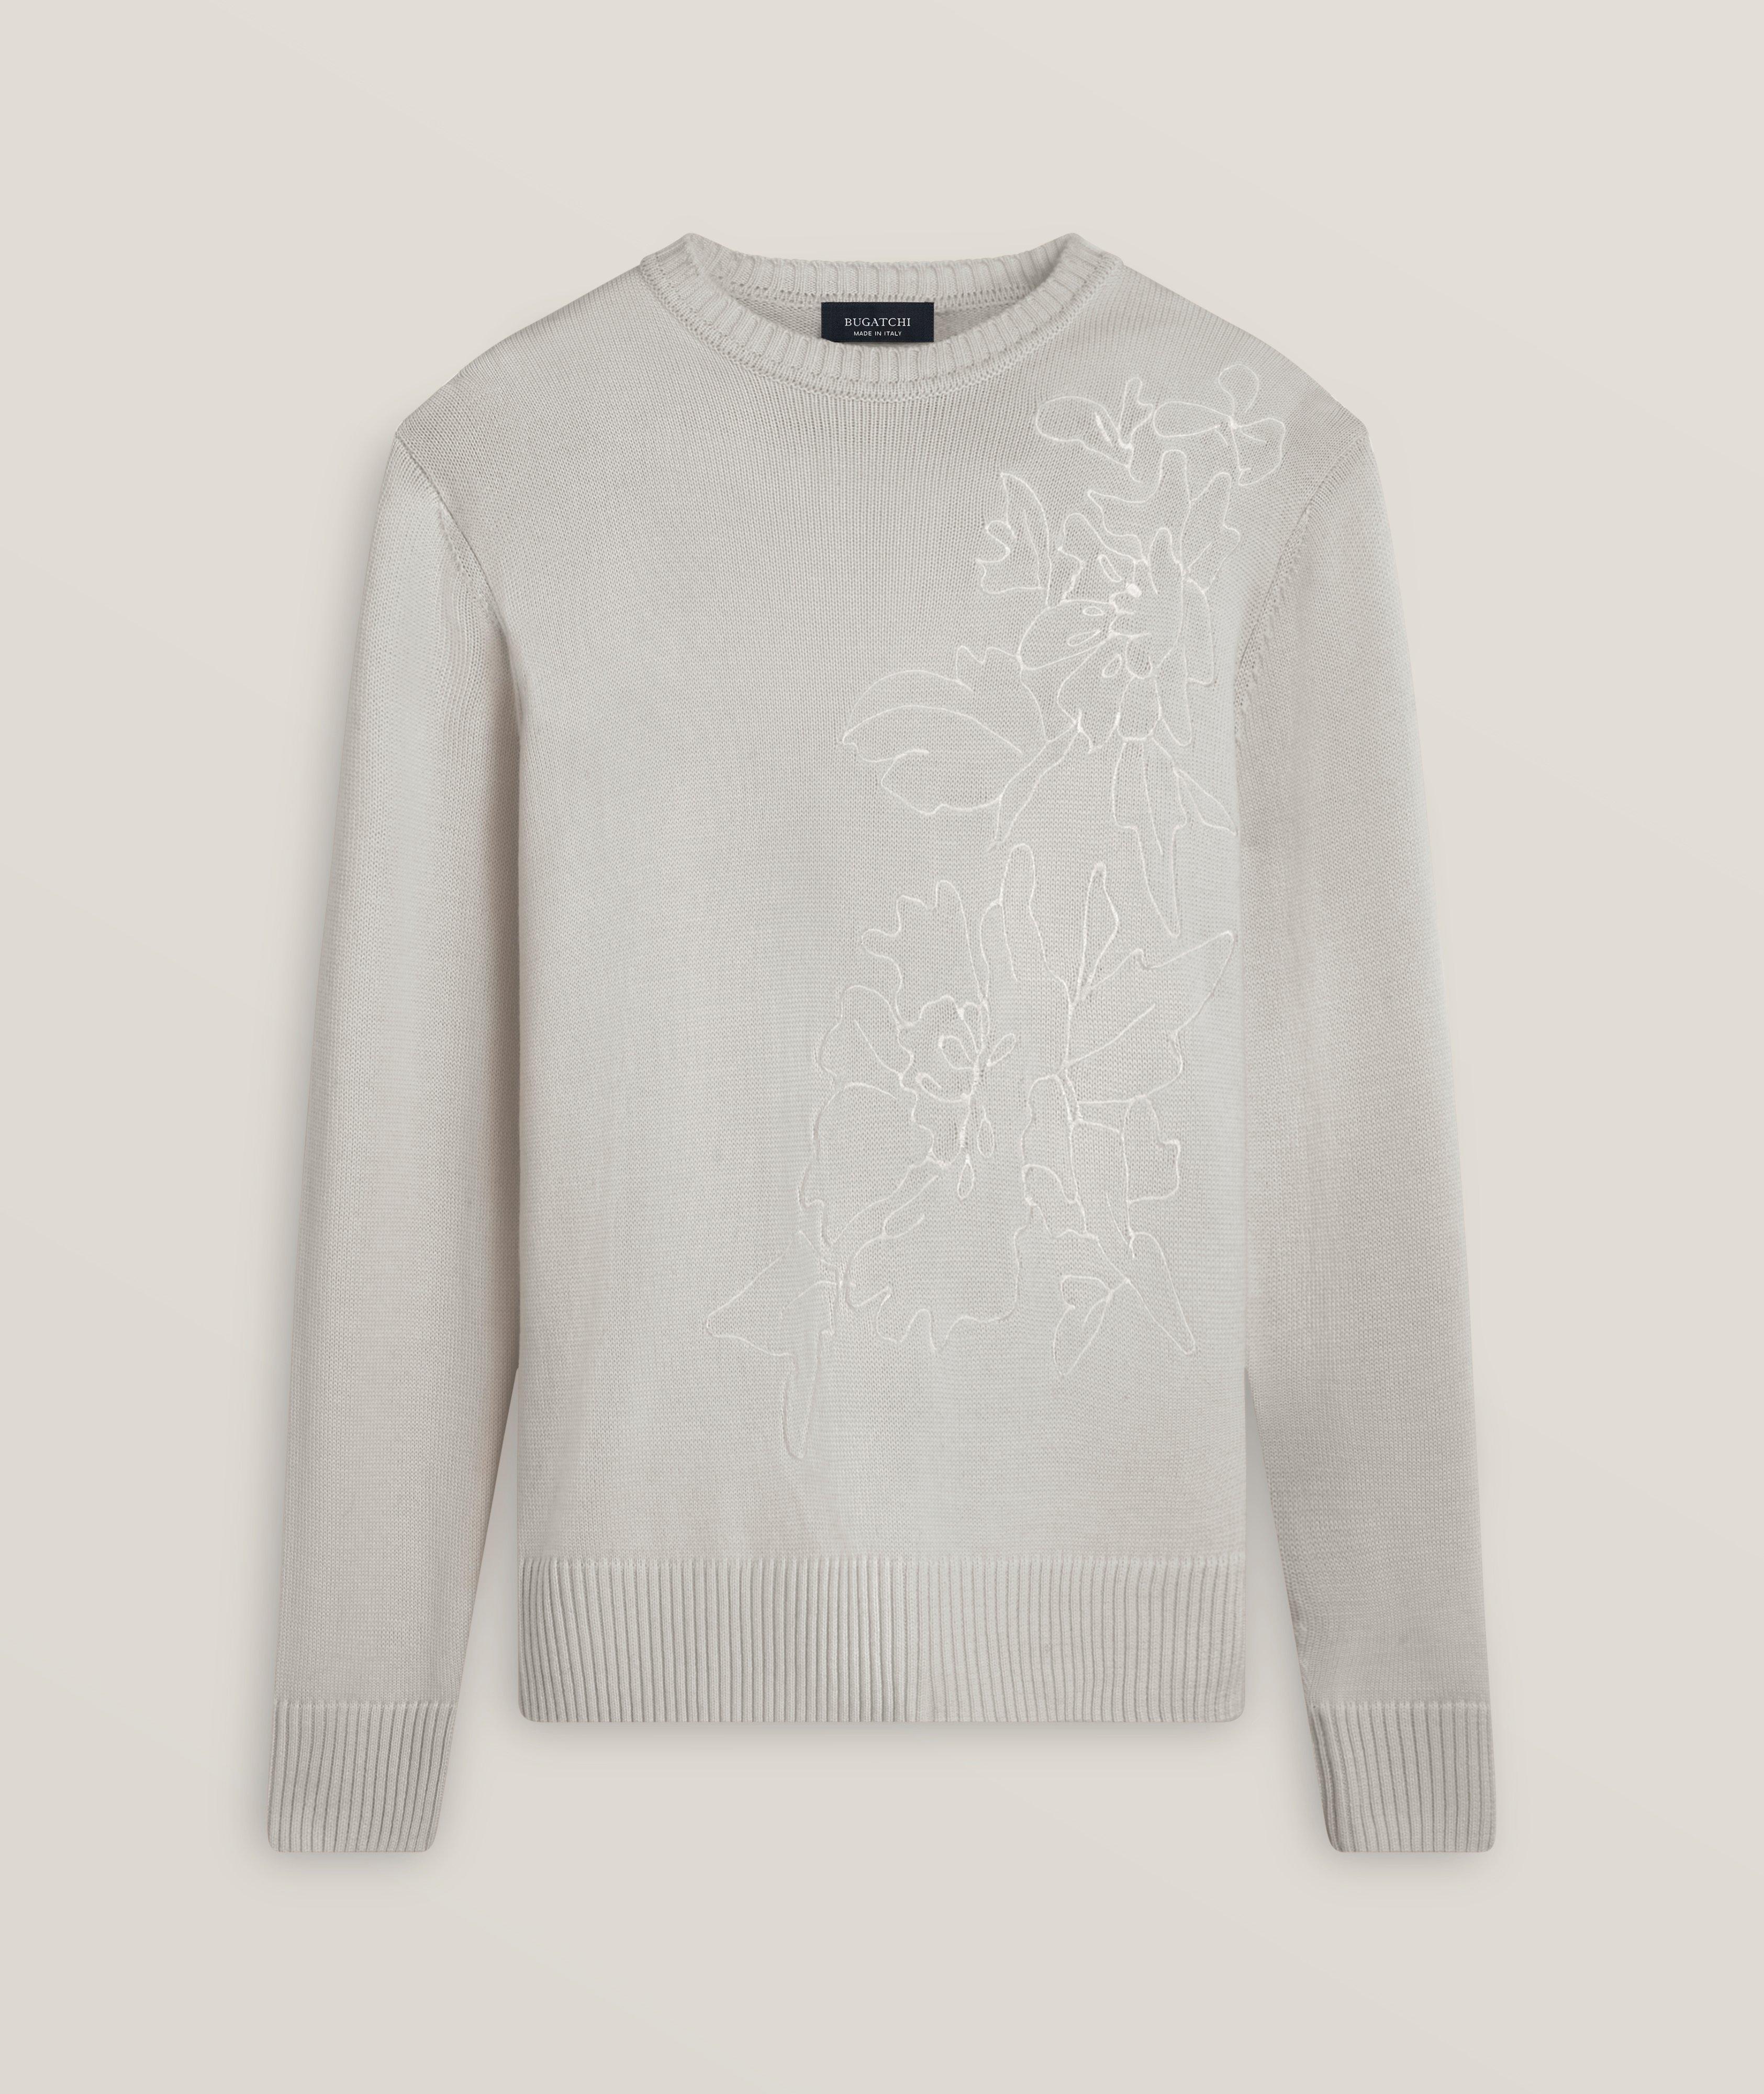 Floral Embroidered Merino Wool Sweater image 0